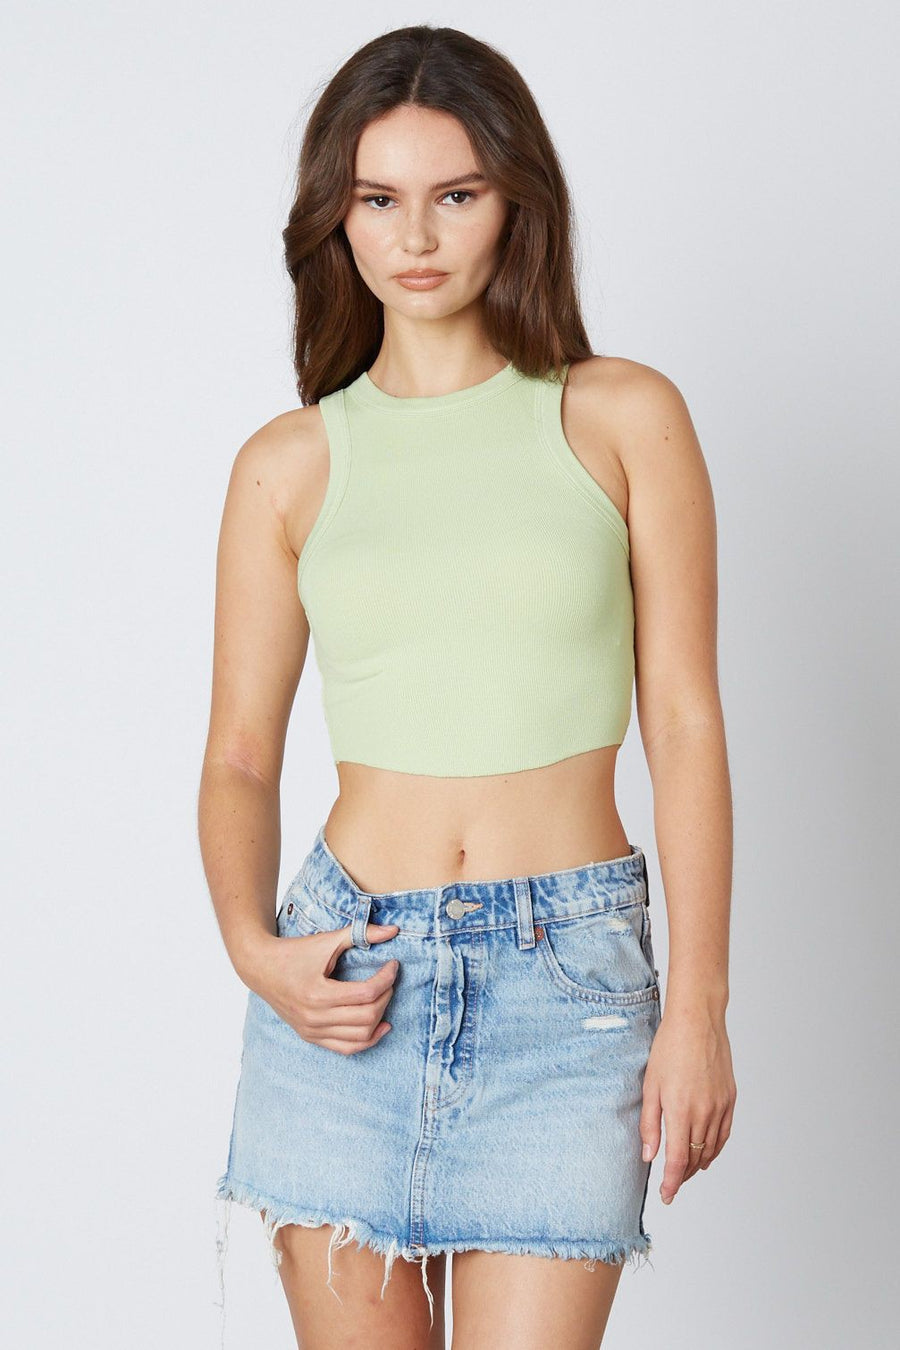 Model is wearing a cropped tank top in the color honeydew.